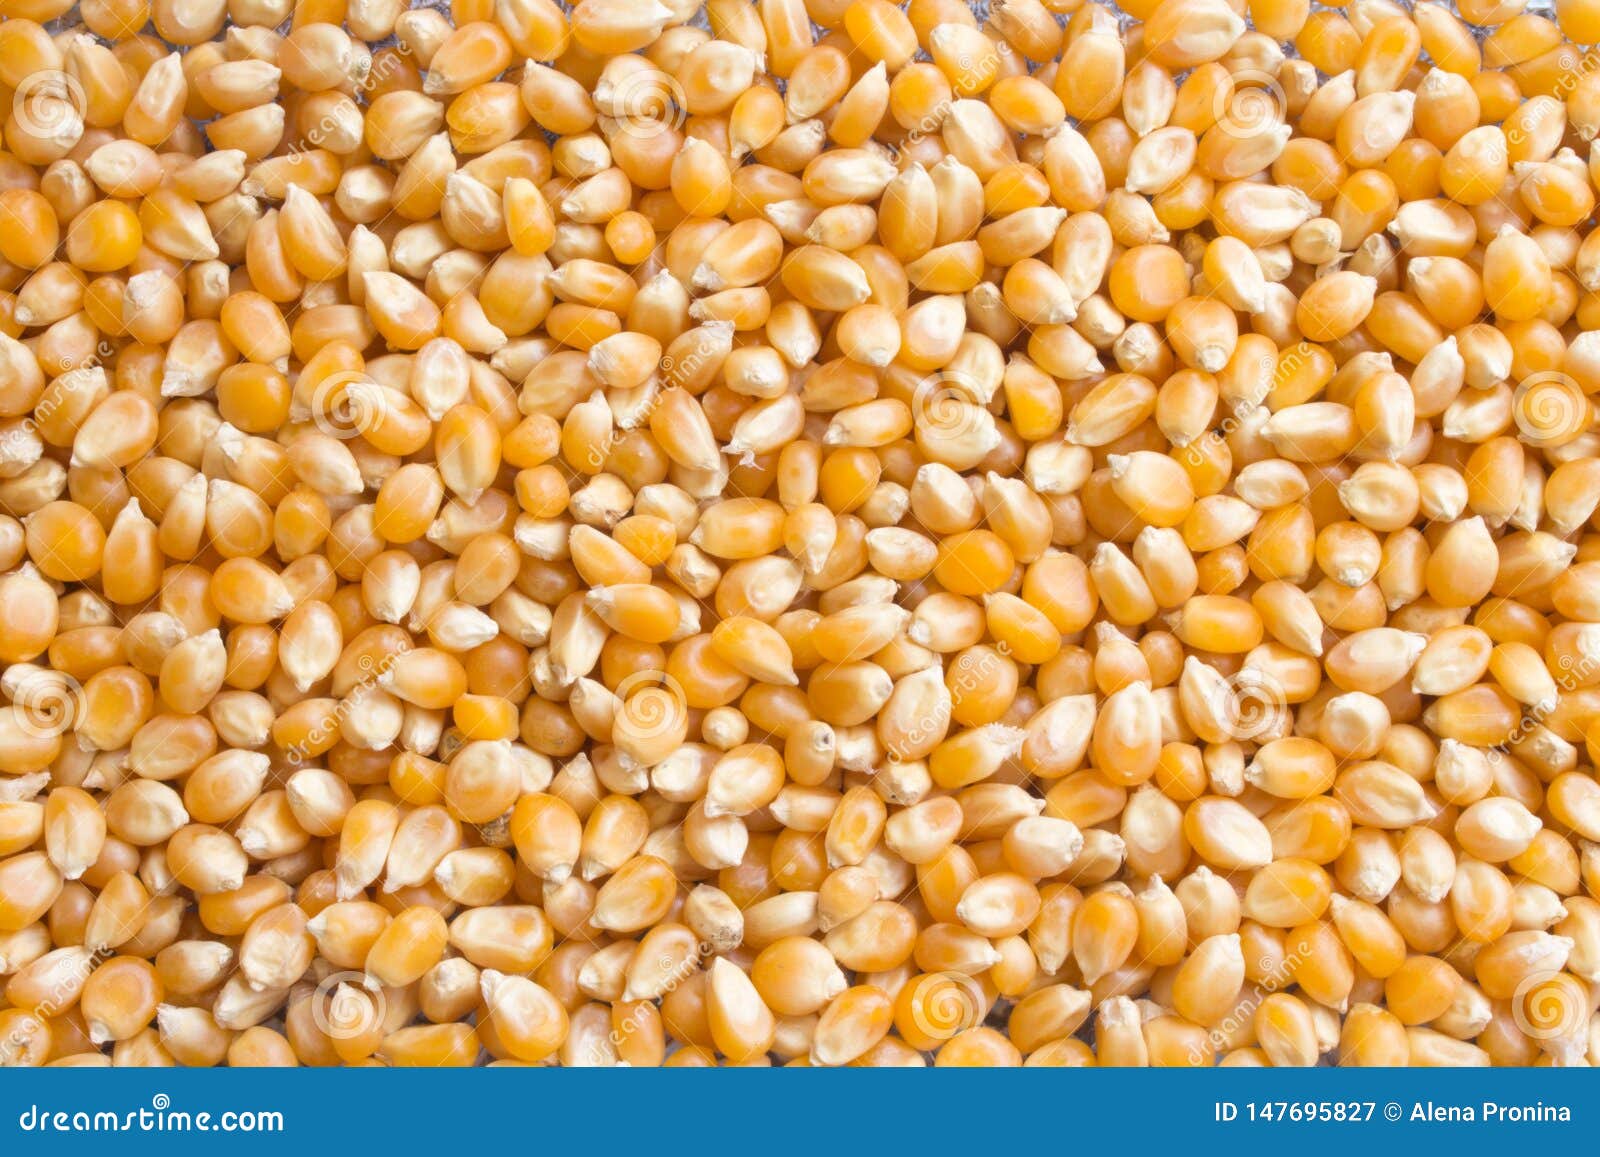 background of dry corn grains. popcorn maize background